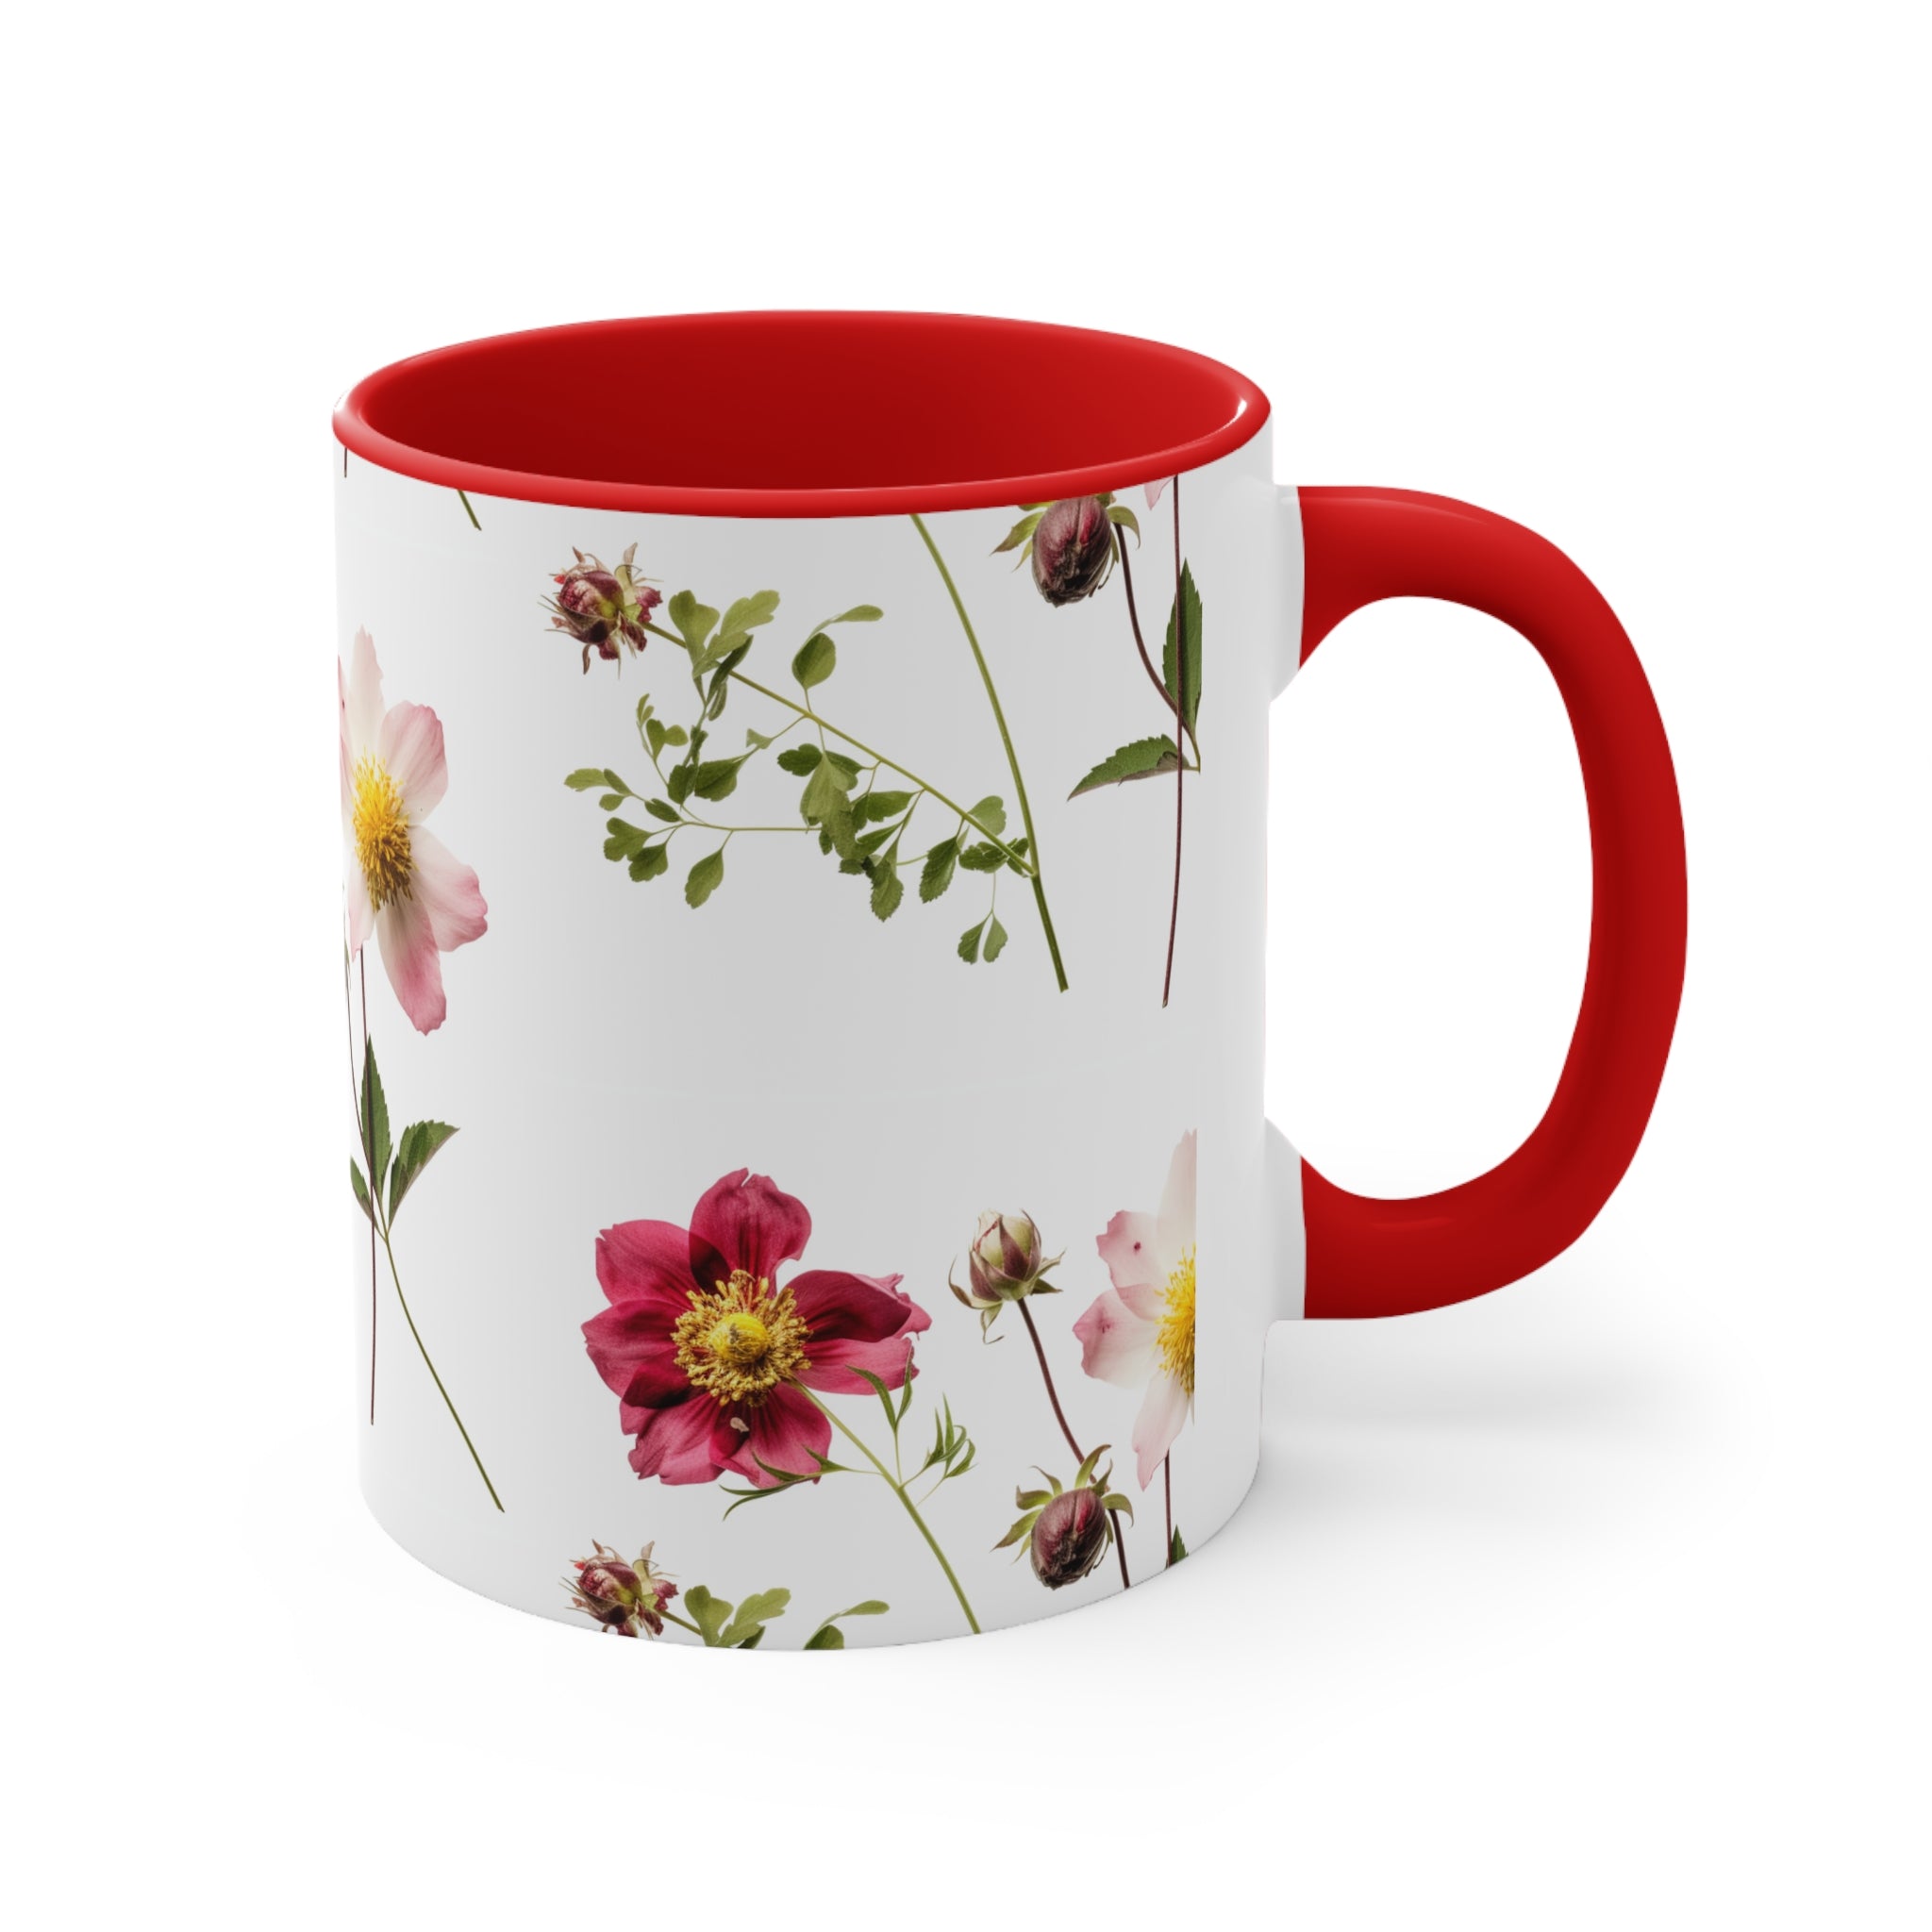 11oz accent coffee mug, Summer Flowers design, ceramic tea cup, handcrafted, vibrant floral gift, unique home decor for "Cawfee" Lovers